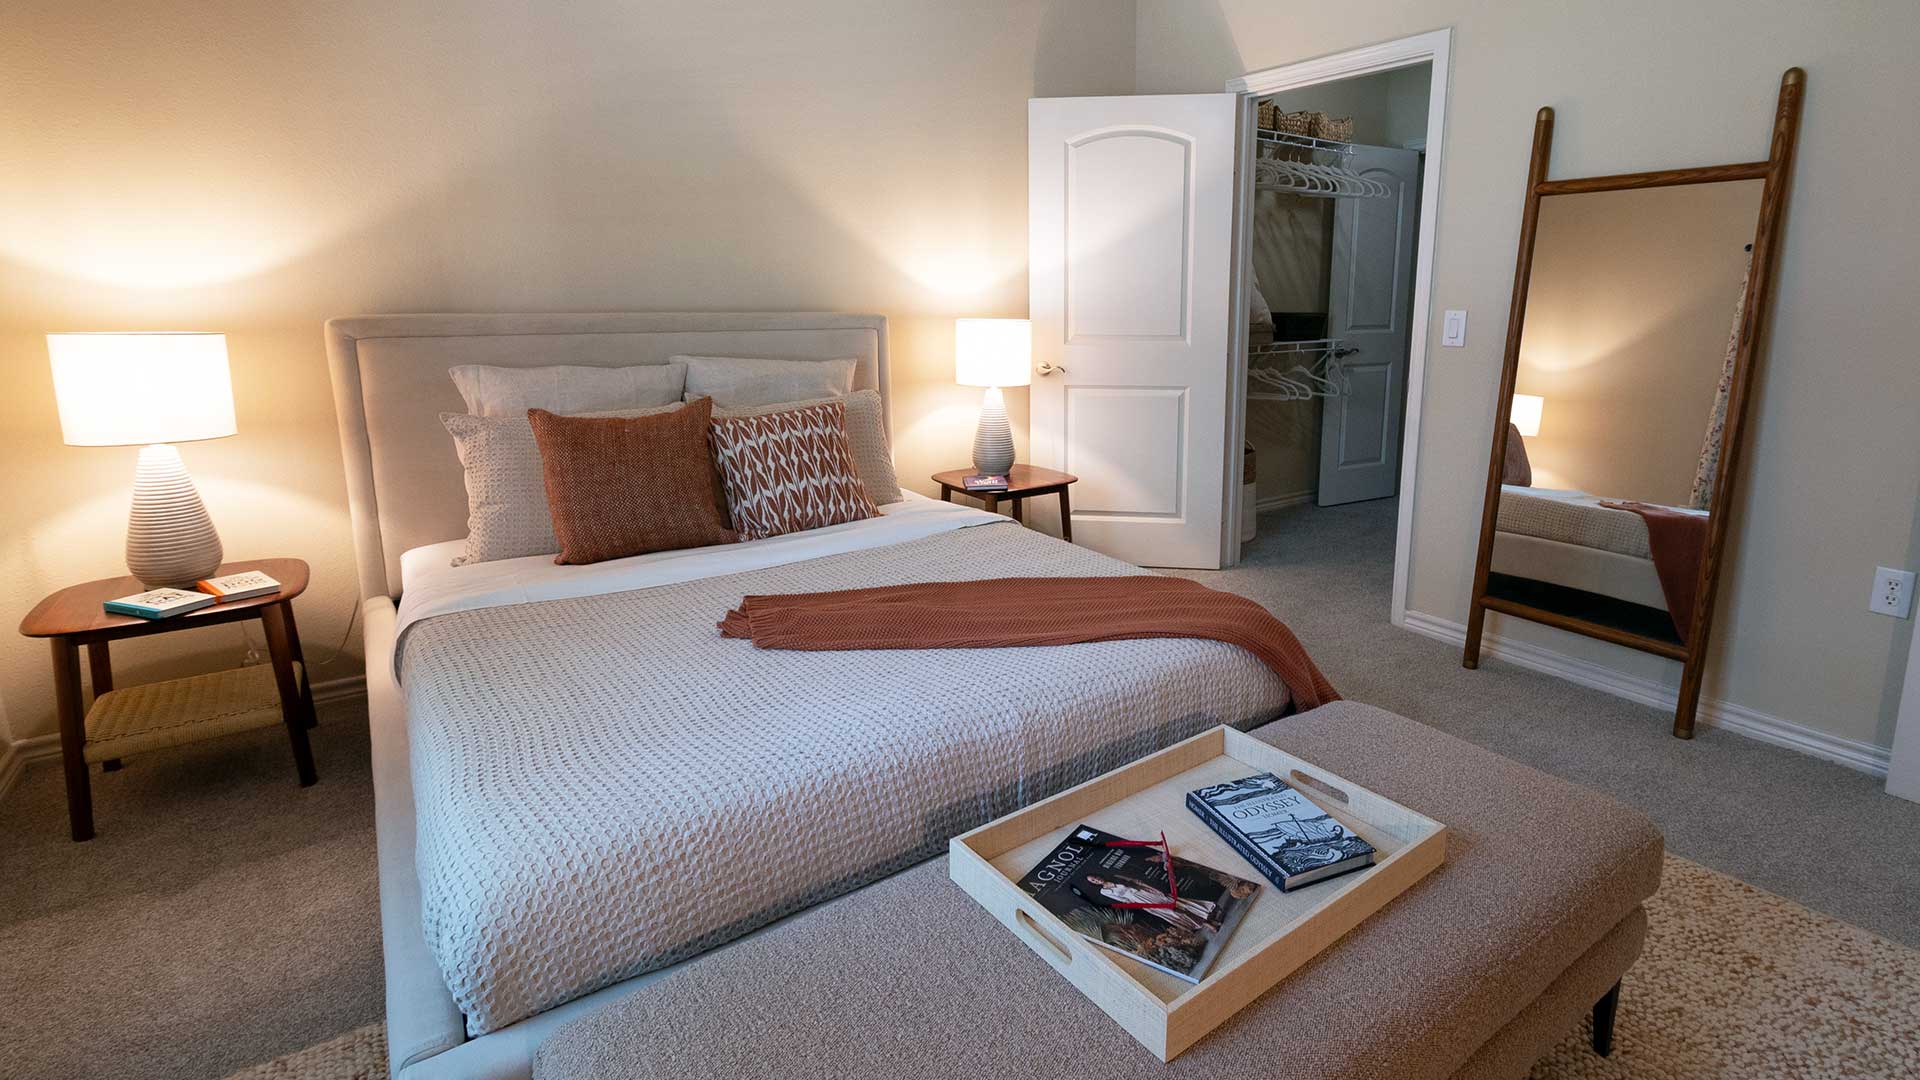 Looking across a large bed with an end table and lit lamp on either side. Behind is a doorway into a closet with a full-body mirror next to it.